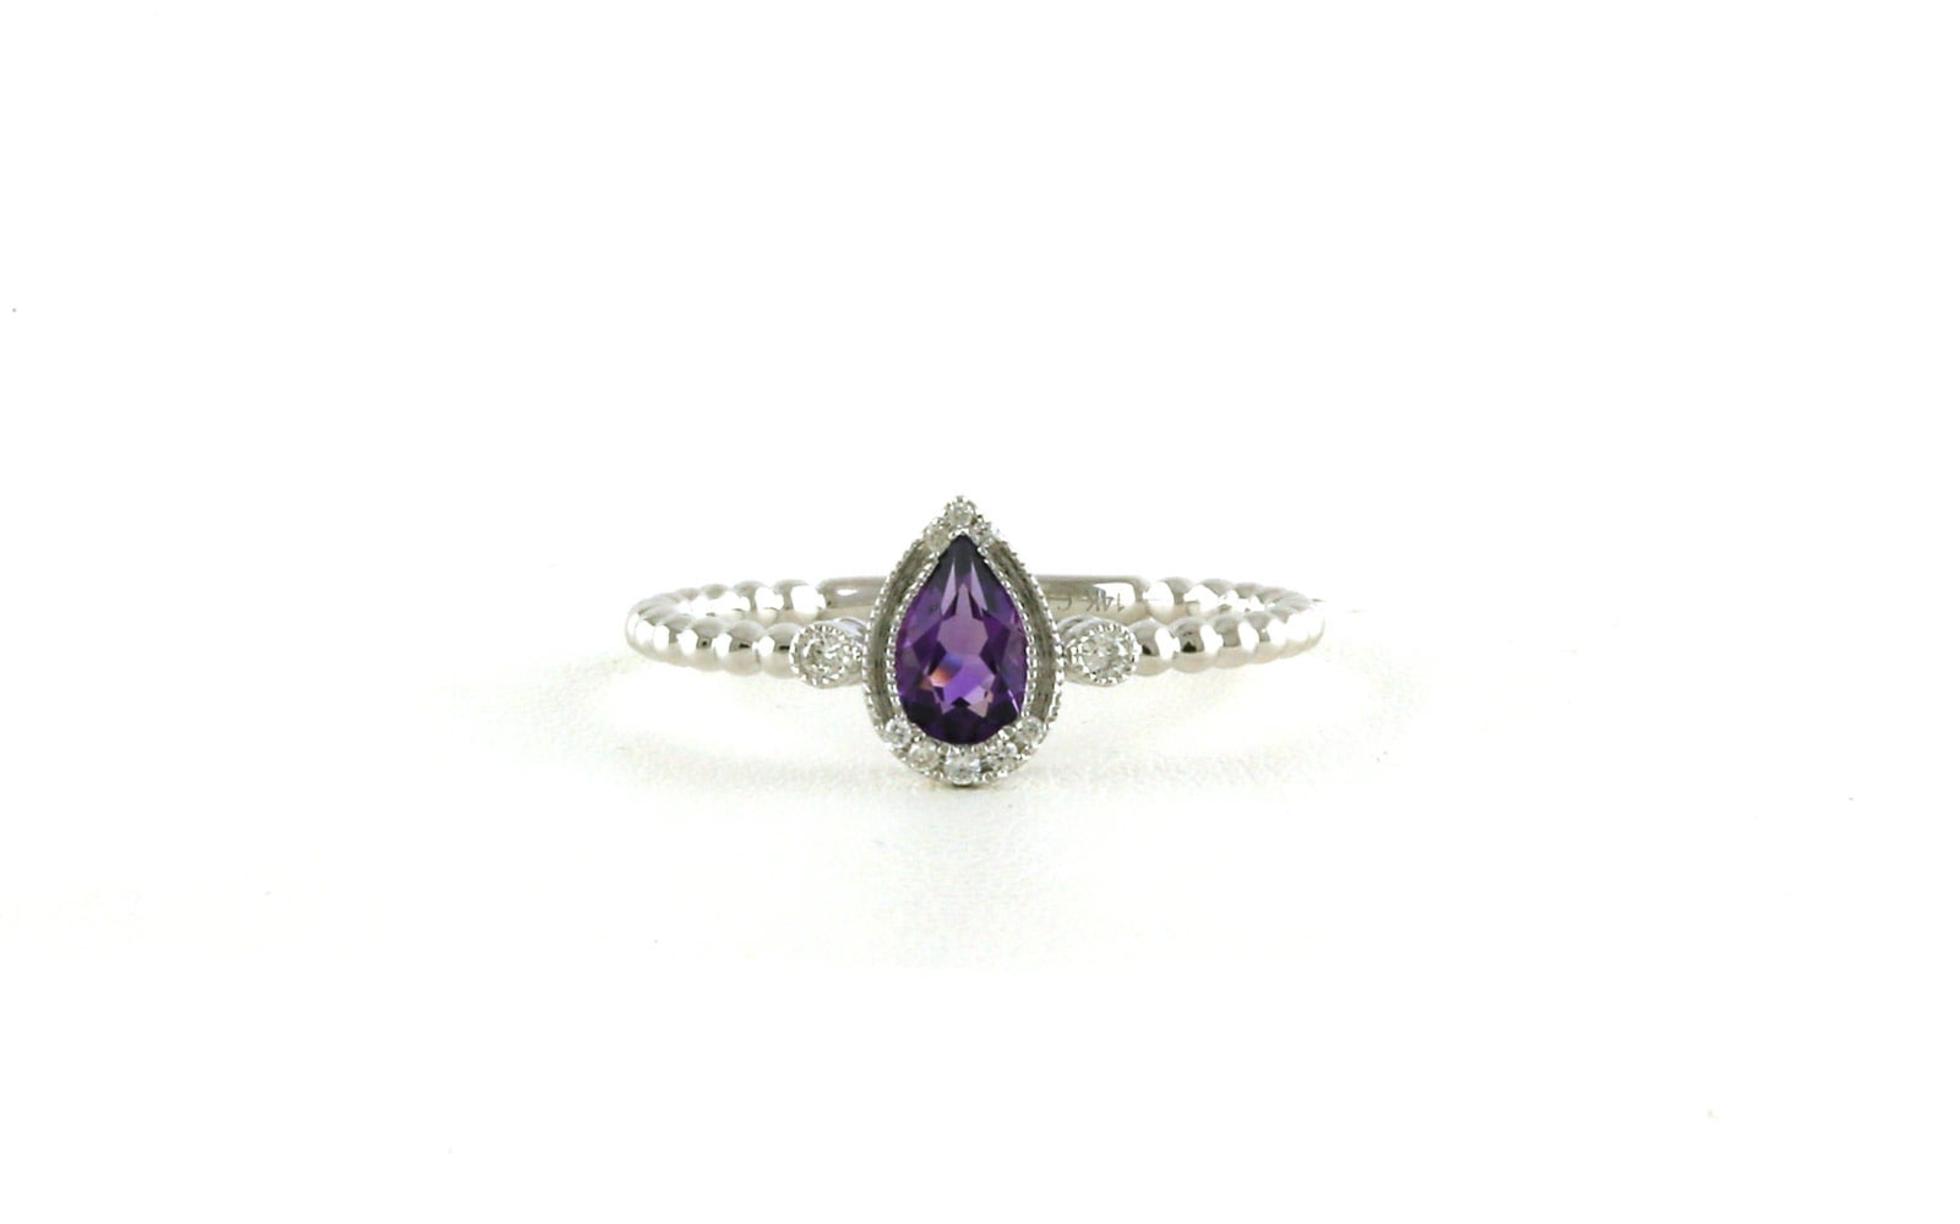 3-Stone Pear-cut Amethyst Ring with Diamonds in White Gold